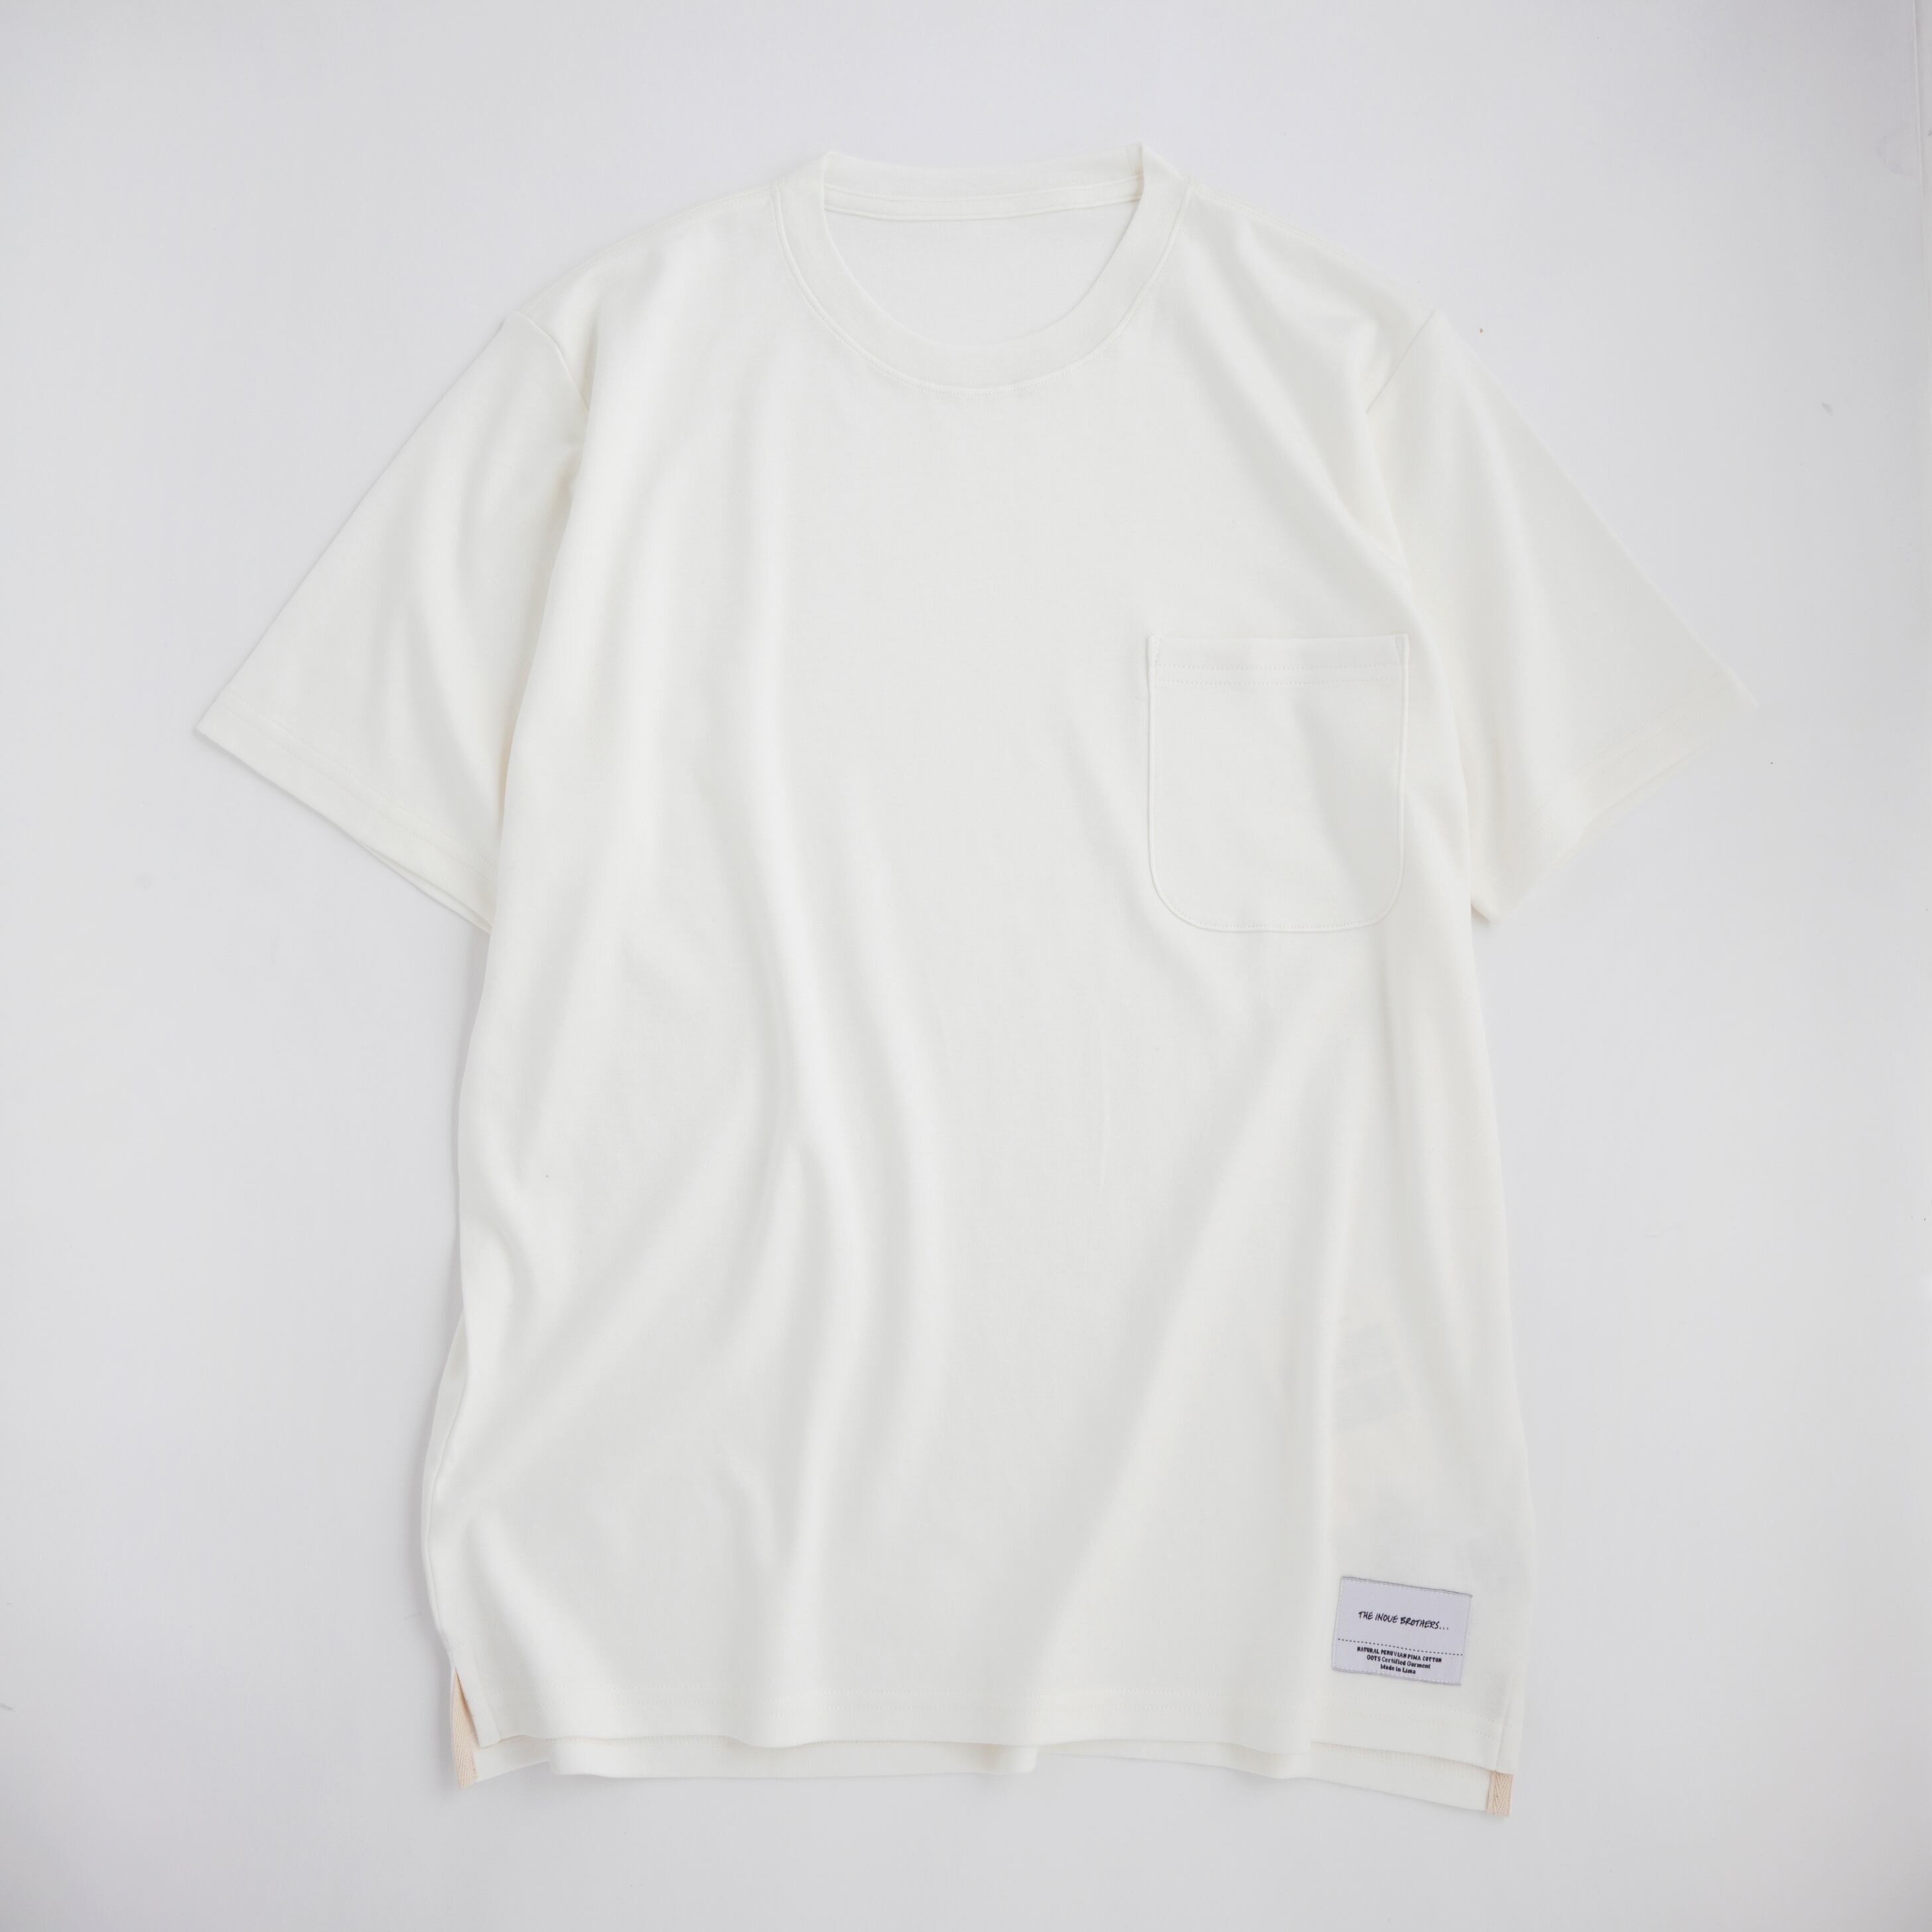 THE INOUE BROTHERS／Standard Pochet T-shirt／White